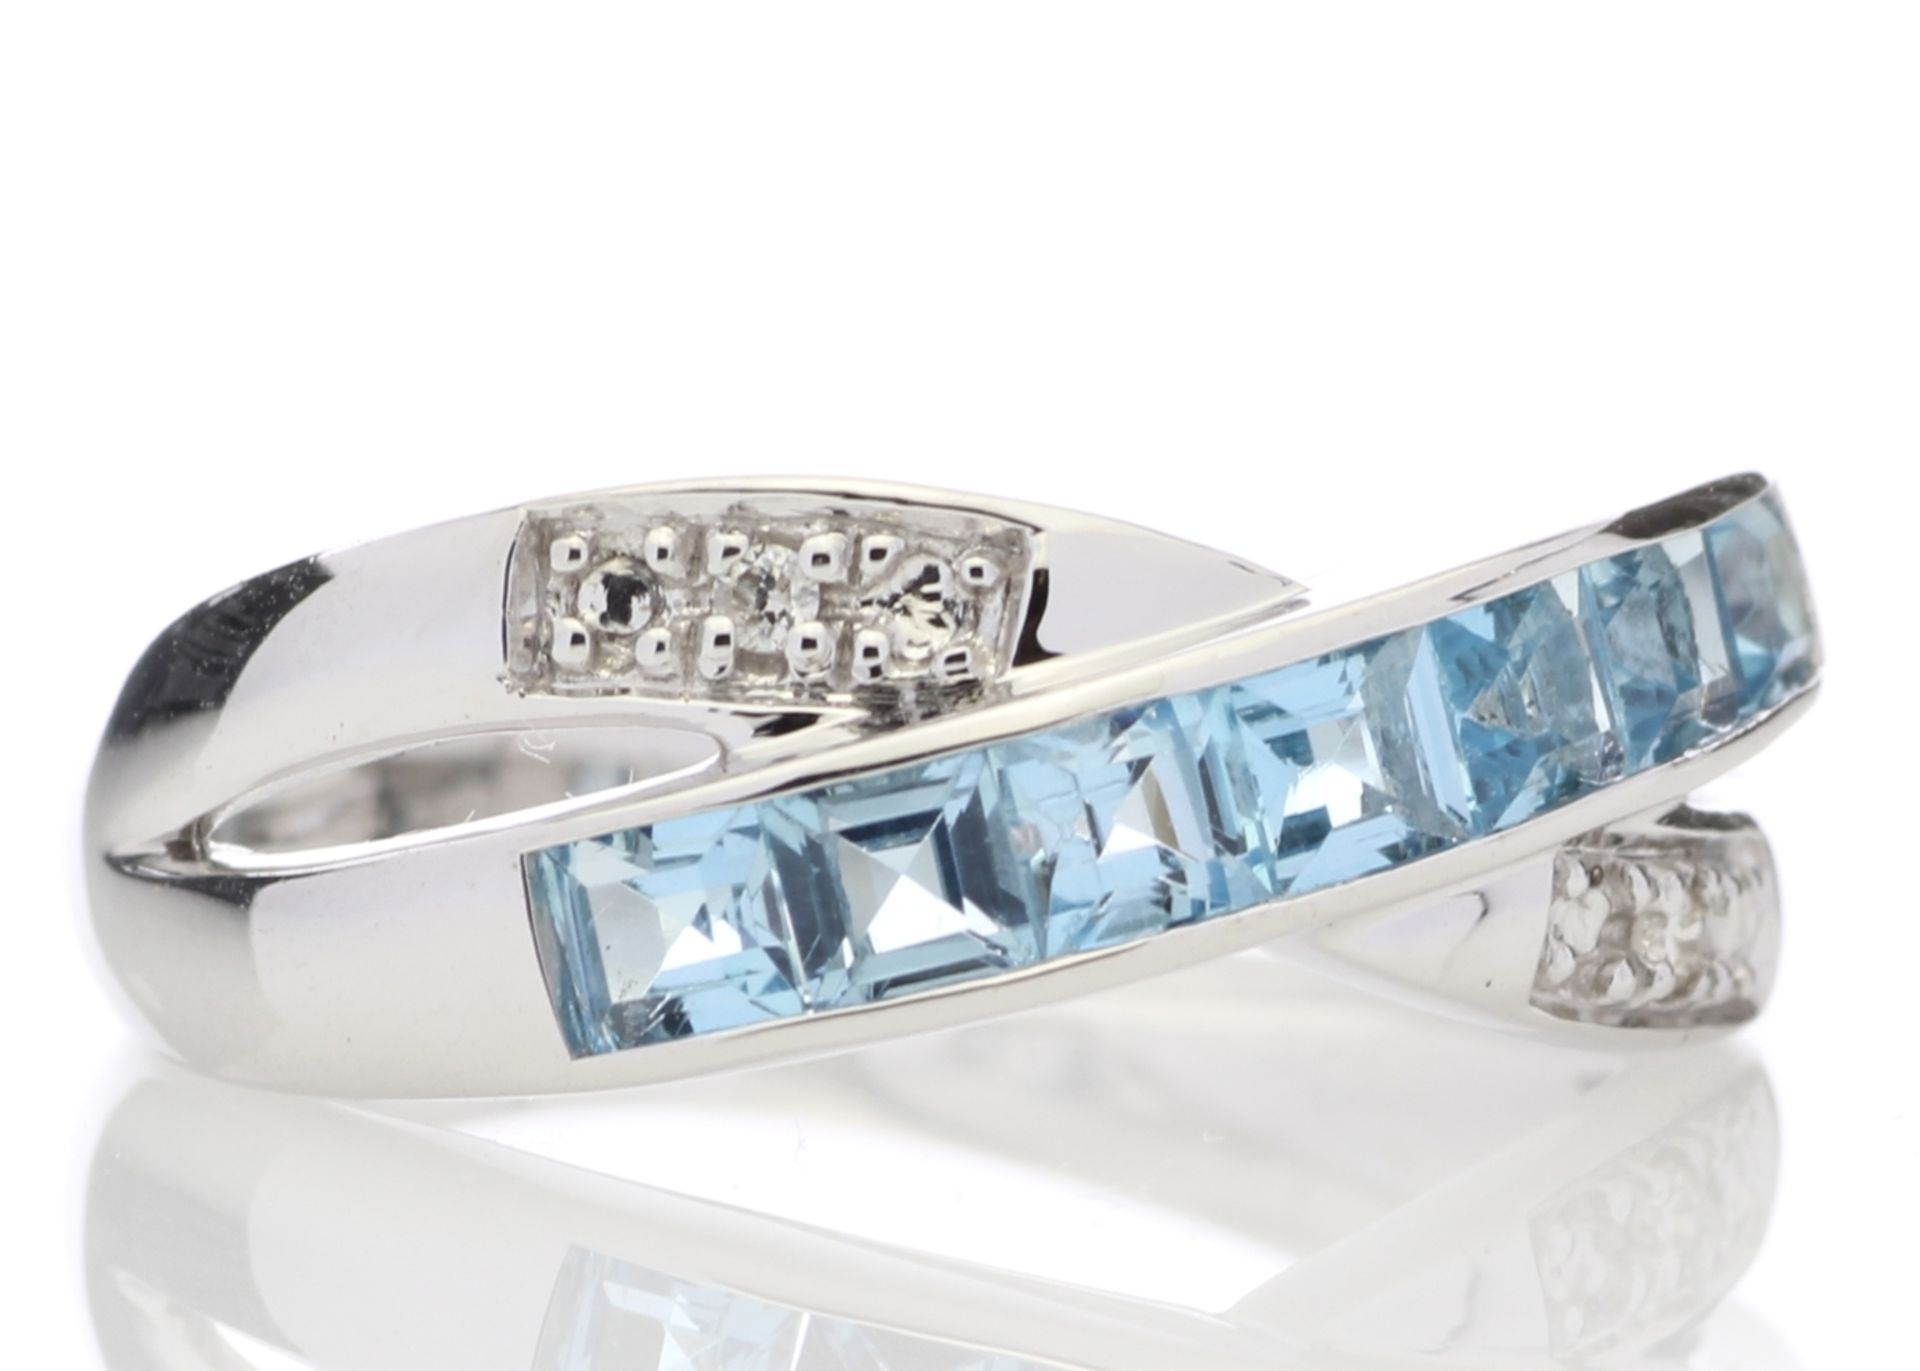 9ct White Gold Blue Topaz And Diamond Ring 0.06 Carats - Valued by GIE £1,625.00 - This twist on a - Image 4 of 9